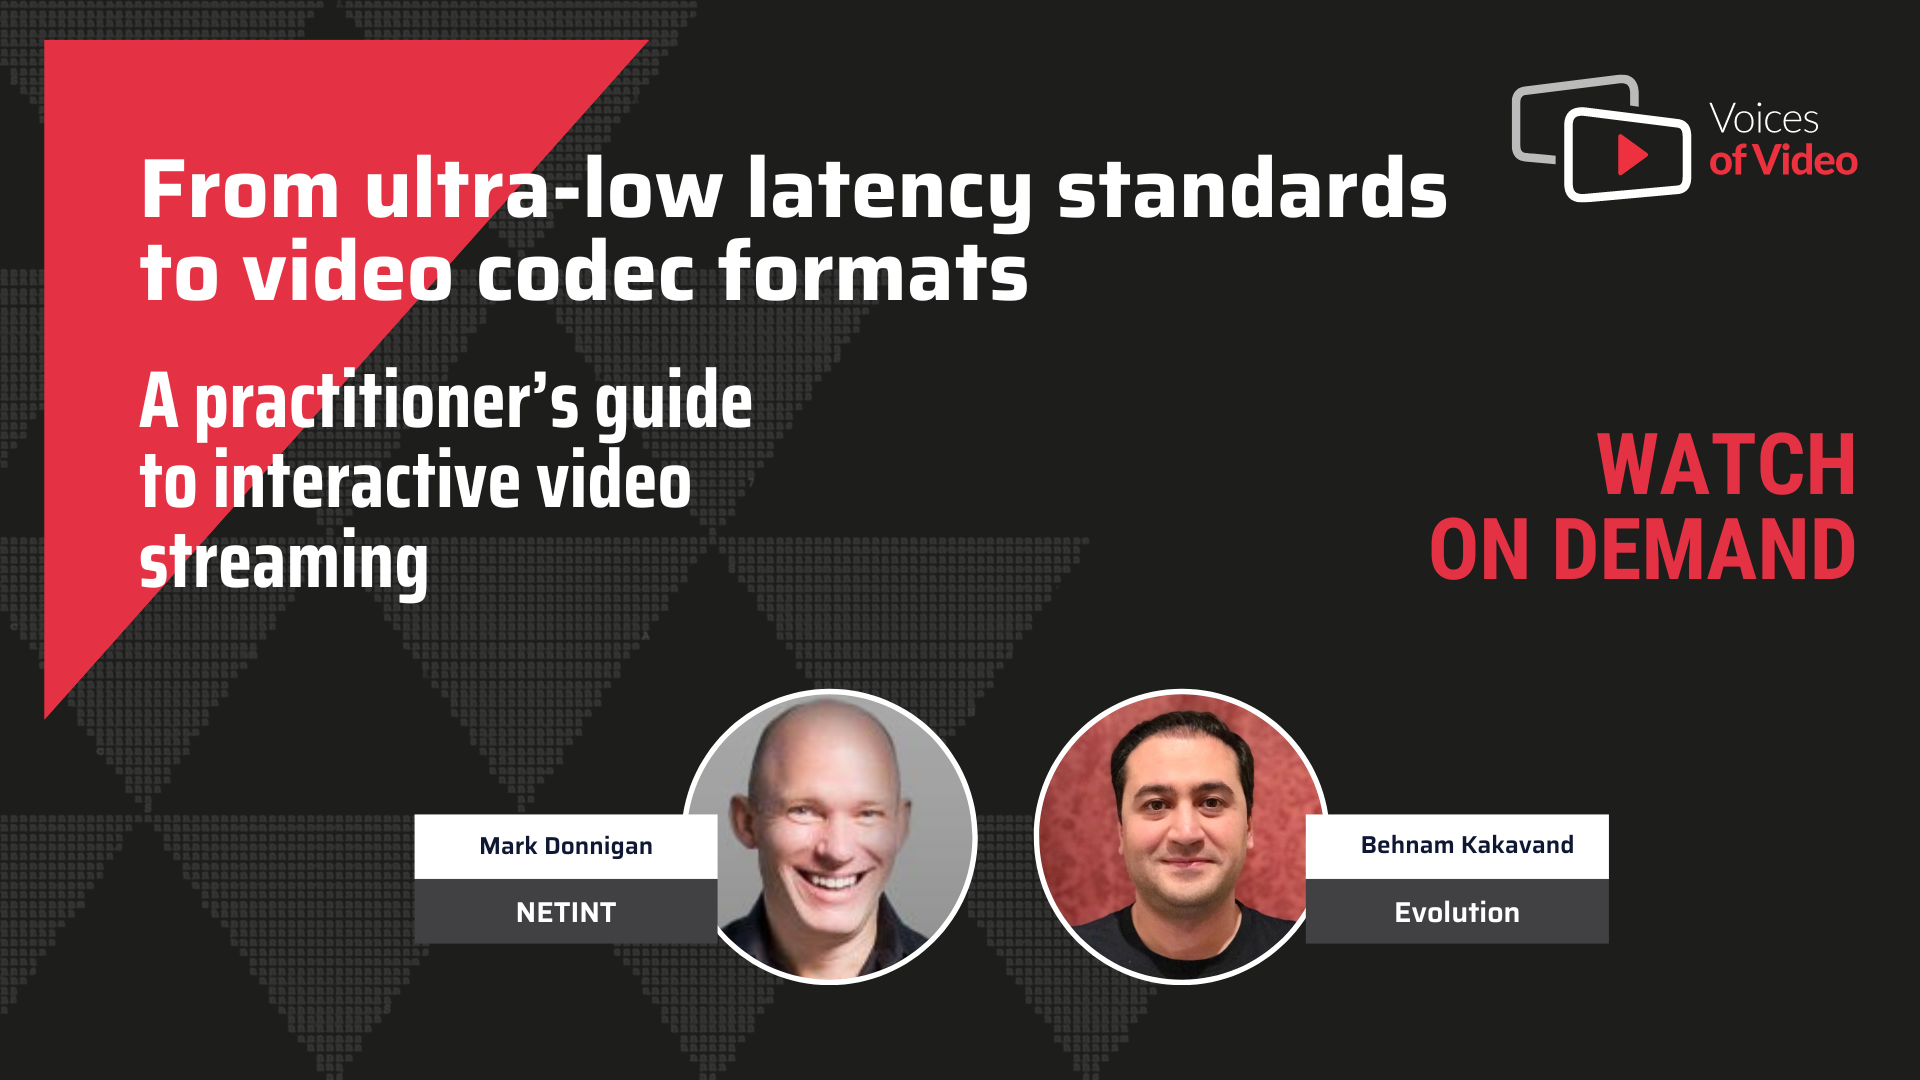 From ultra-low latency standards to video codec formats. Voices of Video w Behnam Kakavand, Evolution.